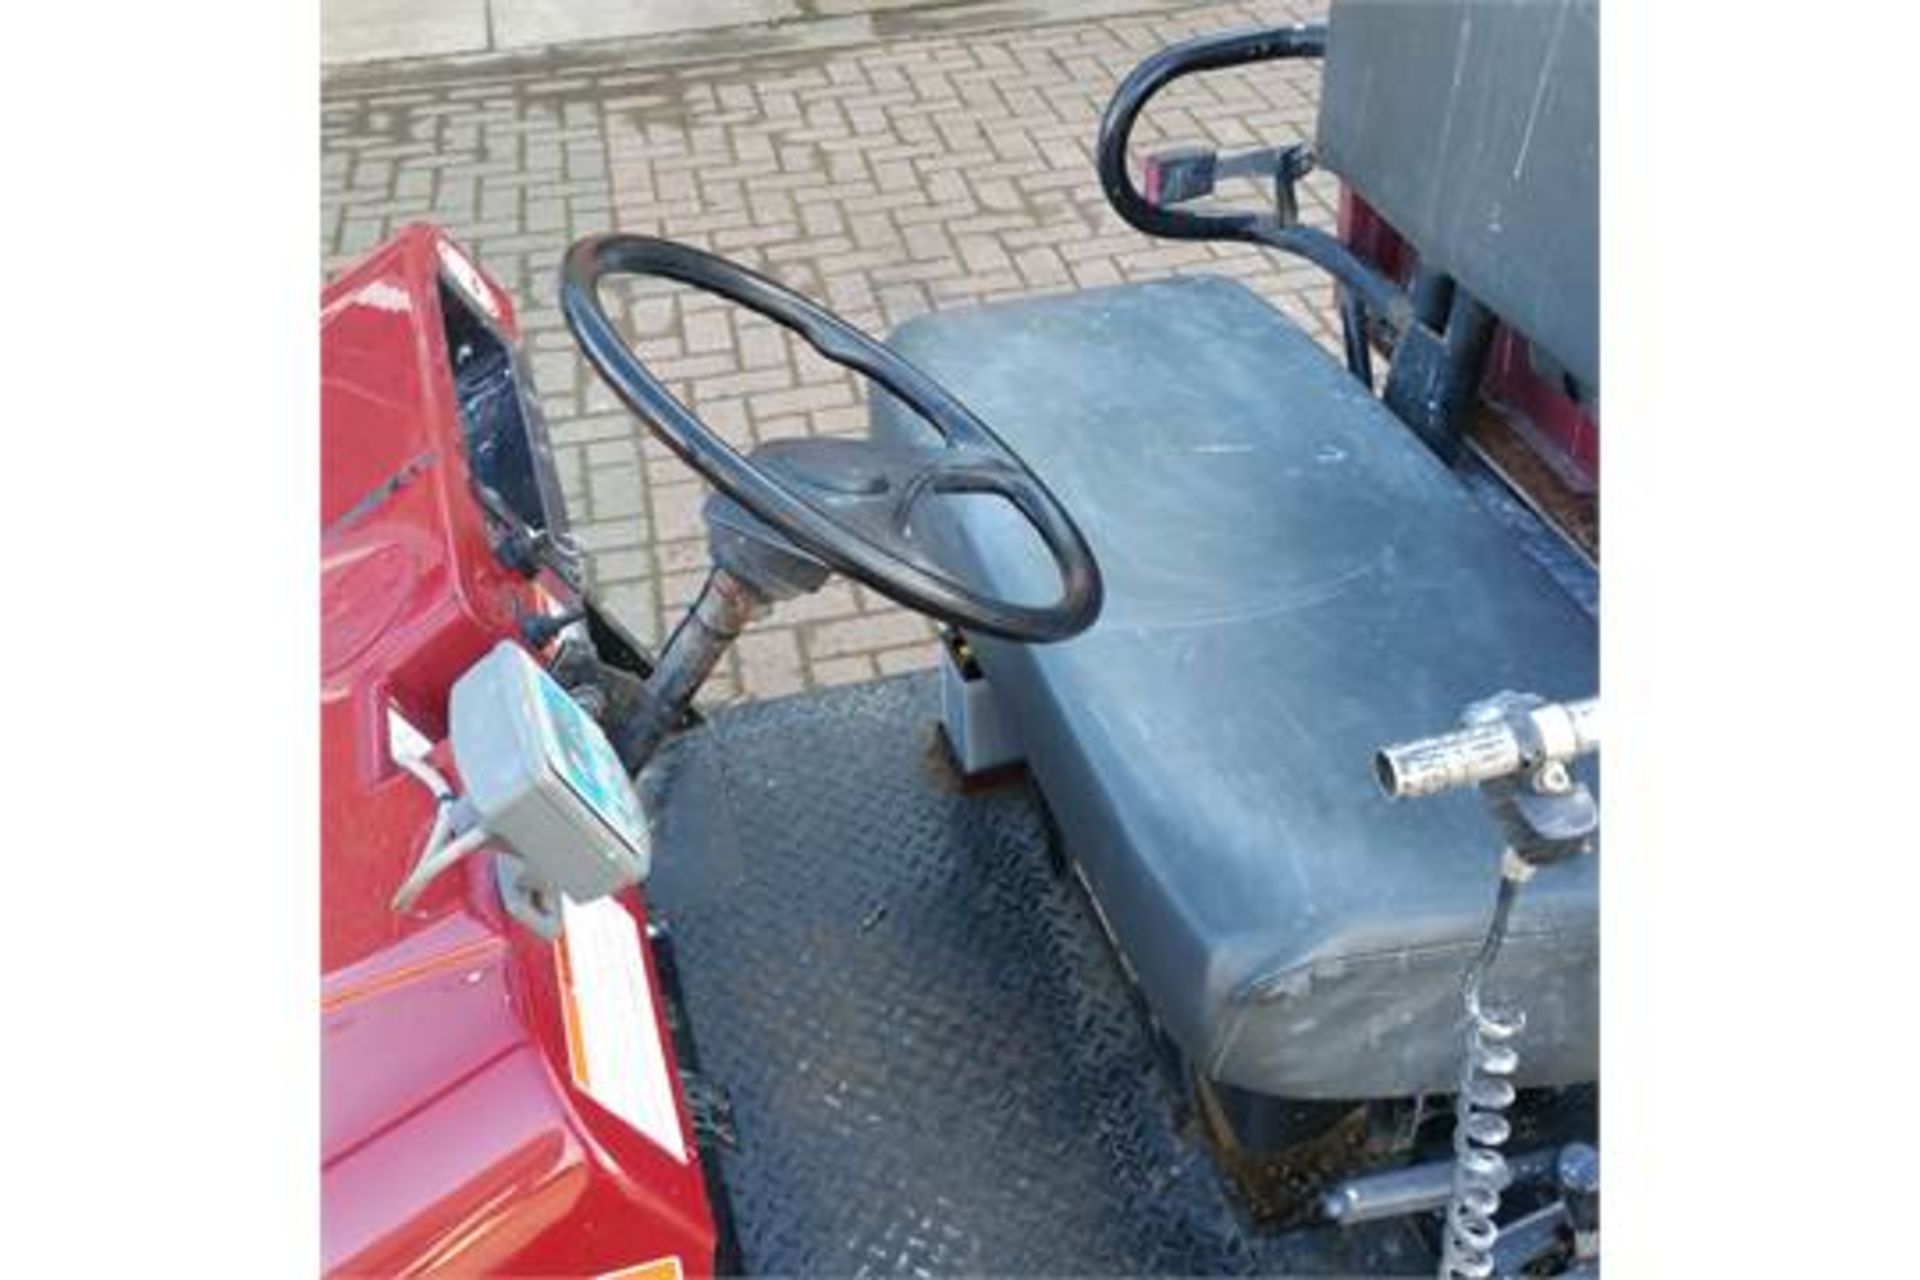 Kawasaki Mule 550 Petrol single cylinder Hours 586 from new Only used for line marking White line - Image 6 of 6